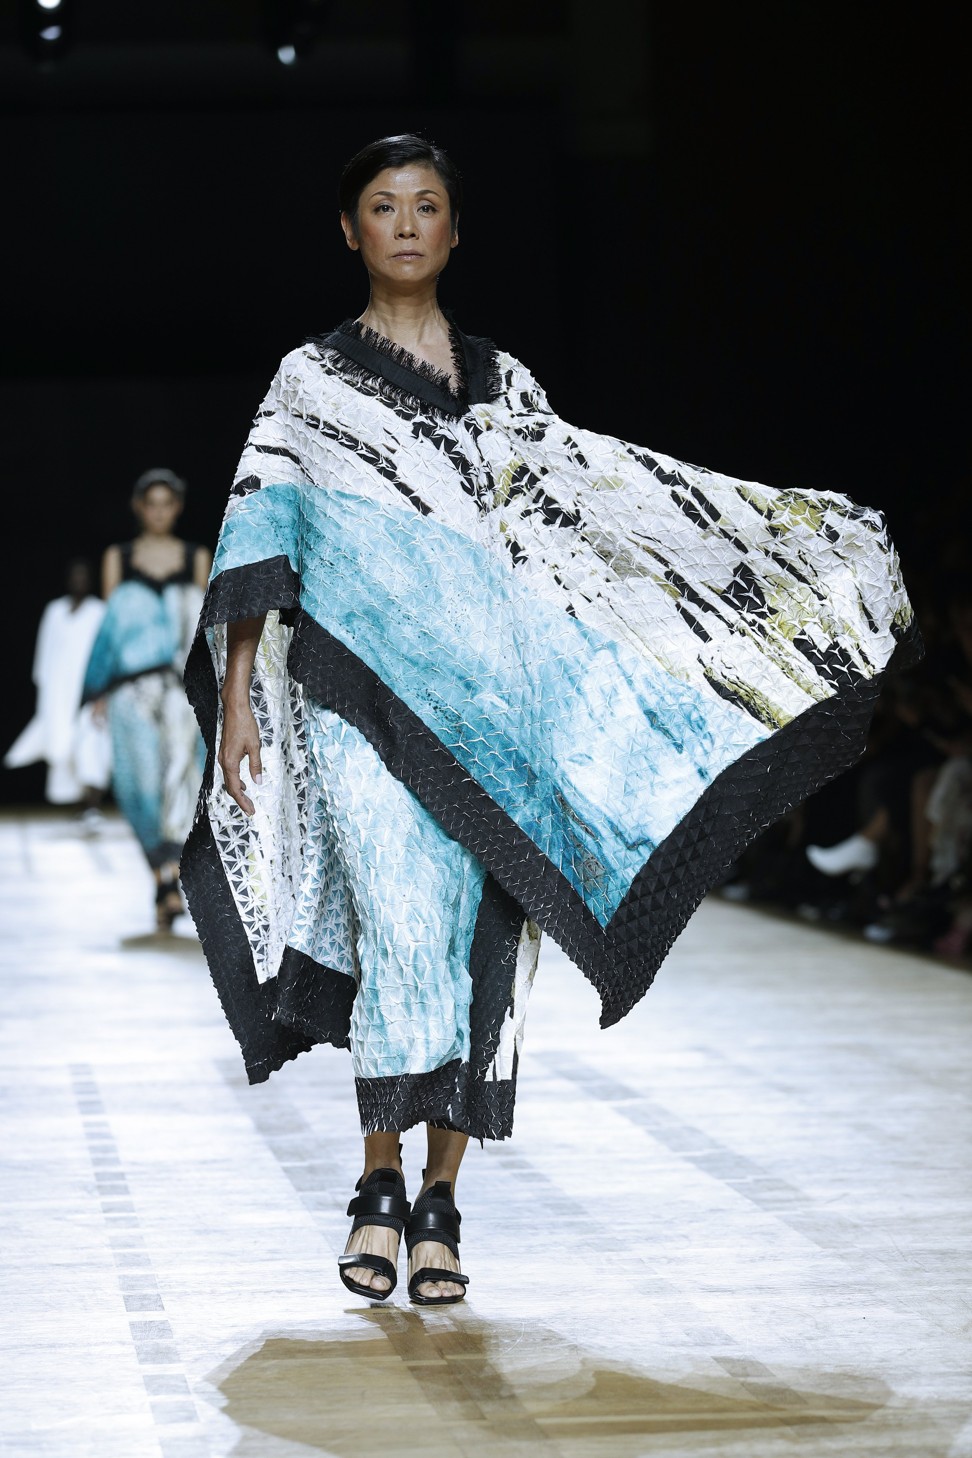 Issey Miyake’s spring-summer 2018 ready-to-wear show included three models older than 40 at Paris Fashion Week. Photo: EPA